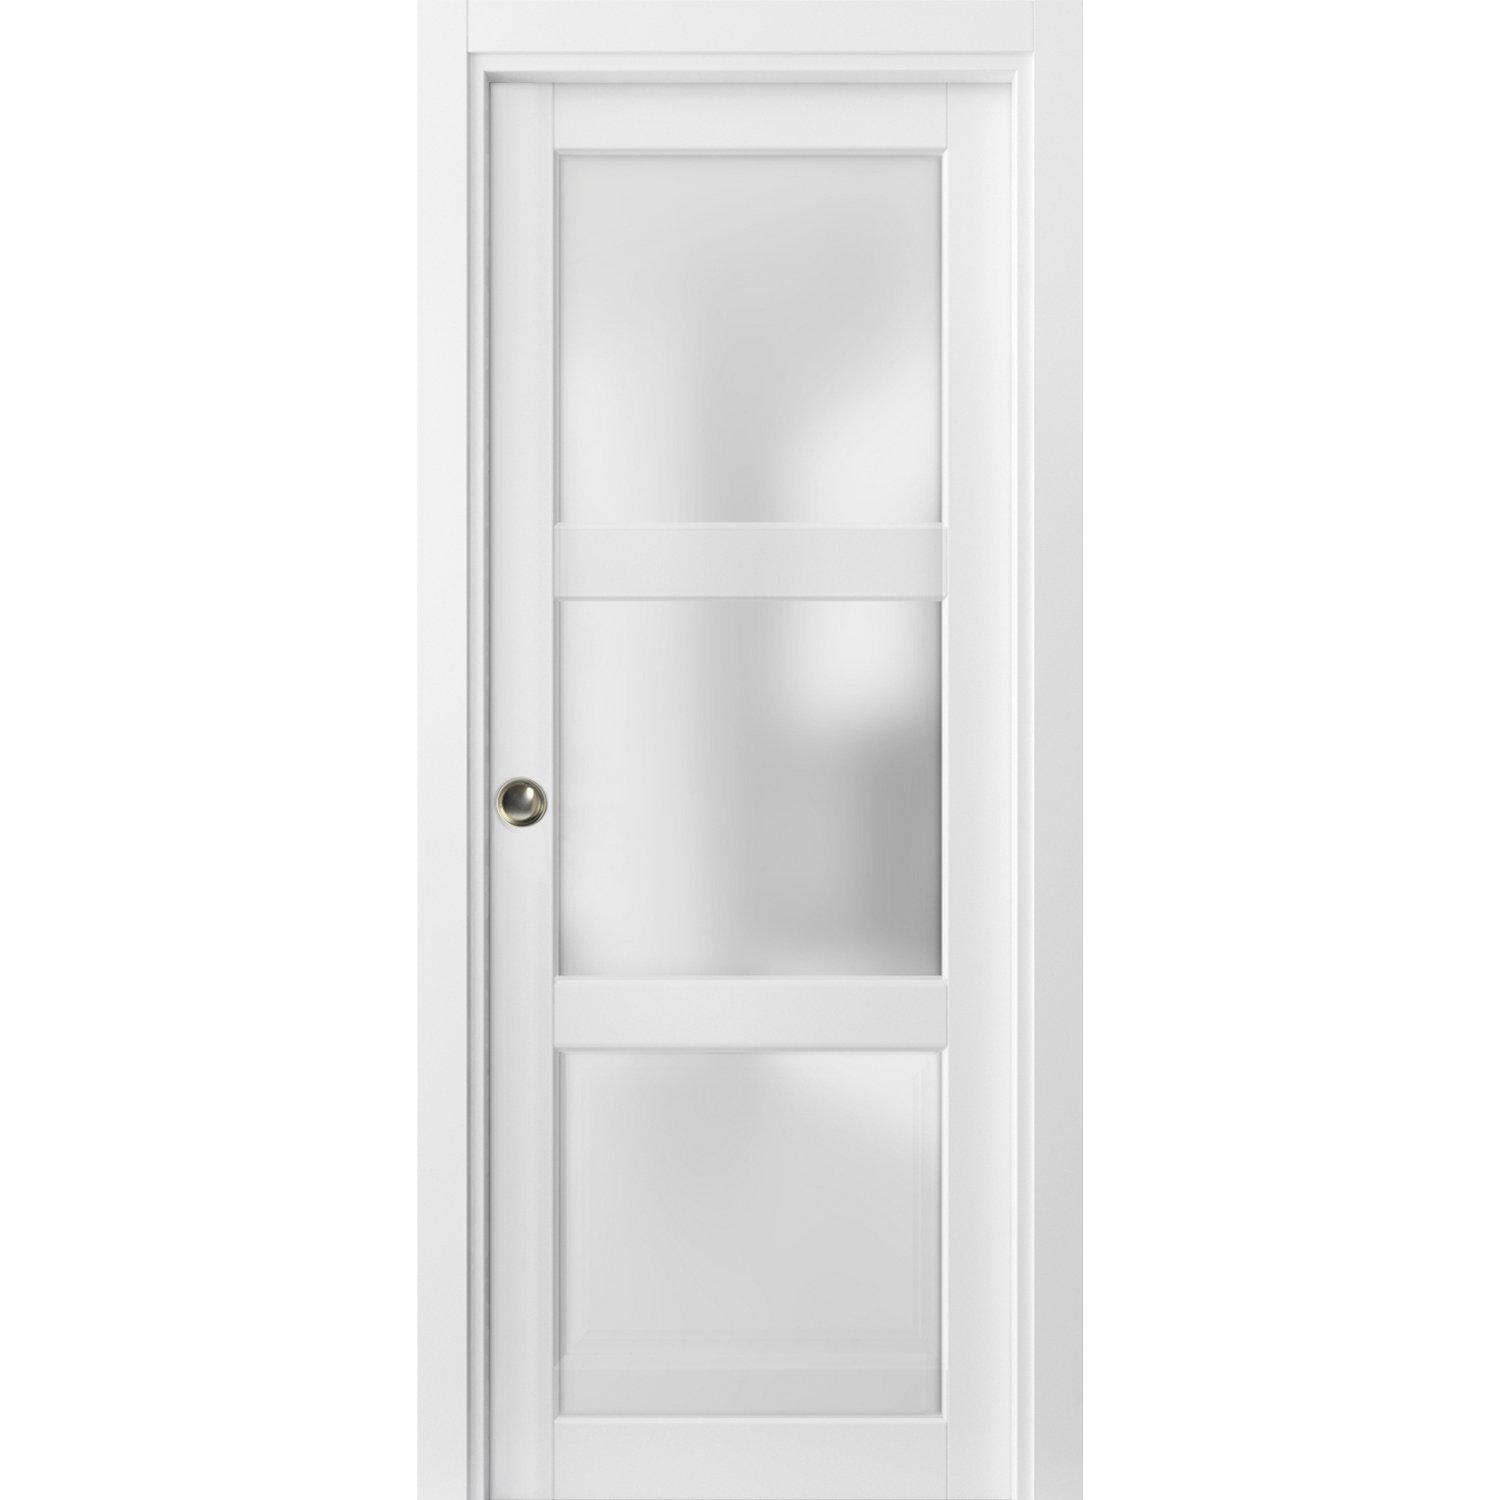 Panel Lite Pocket Door Frosted Glass | Lucia 2552 White Silk | Kit Trims Rail Hardware | Solid Wood Interior Pantry Kitchen Bedroom Sliding Closet Sturdy Doors -24